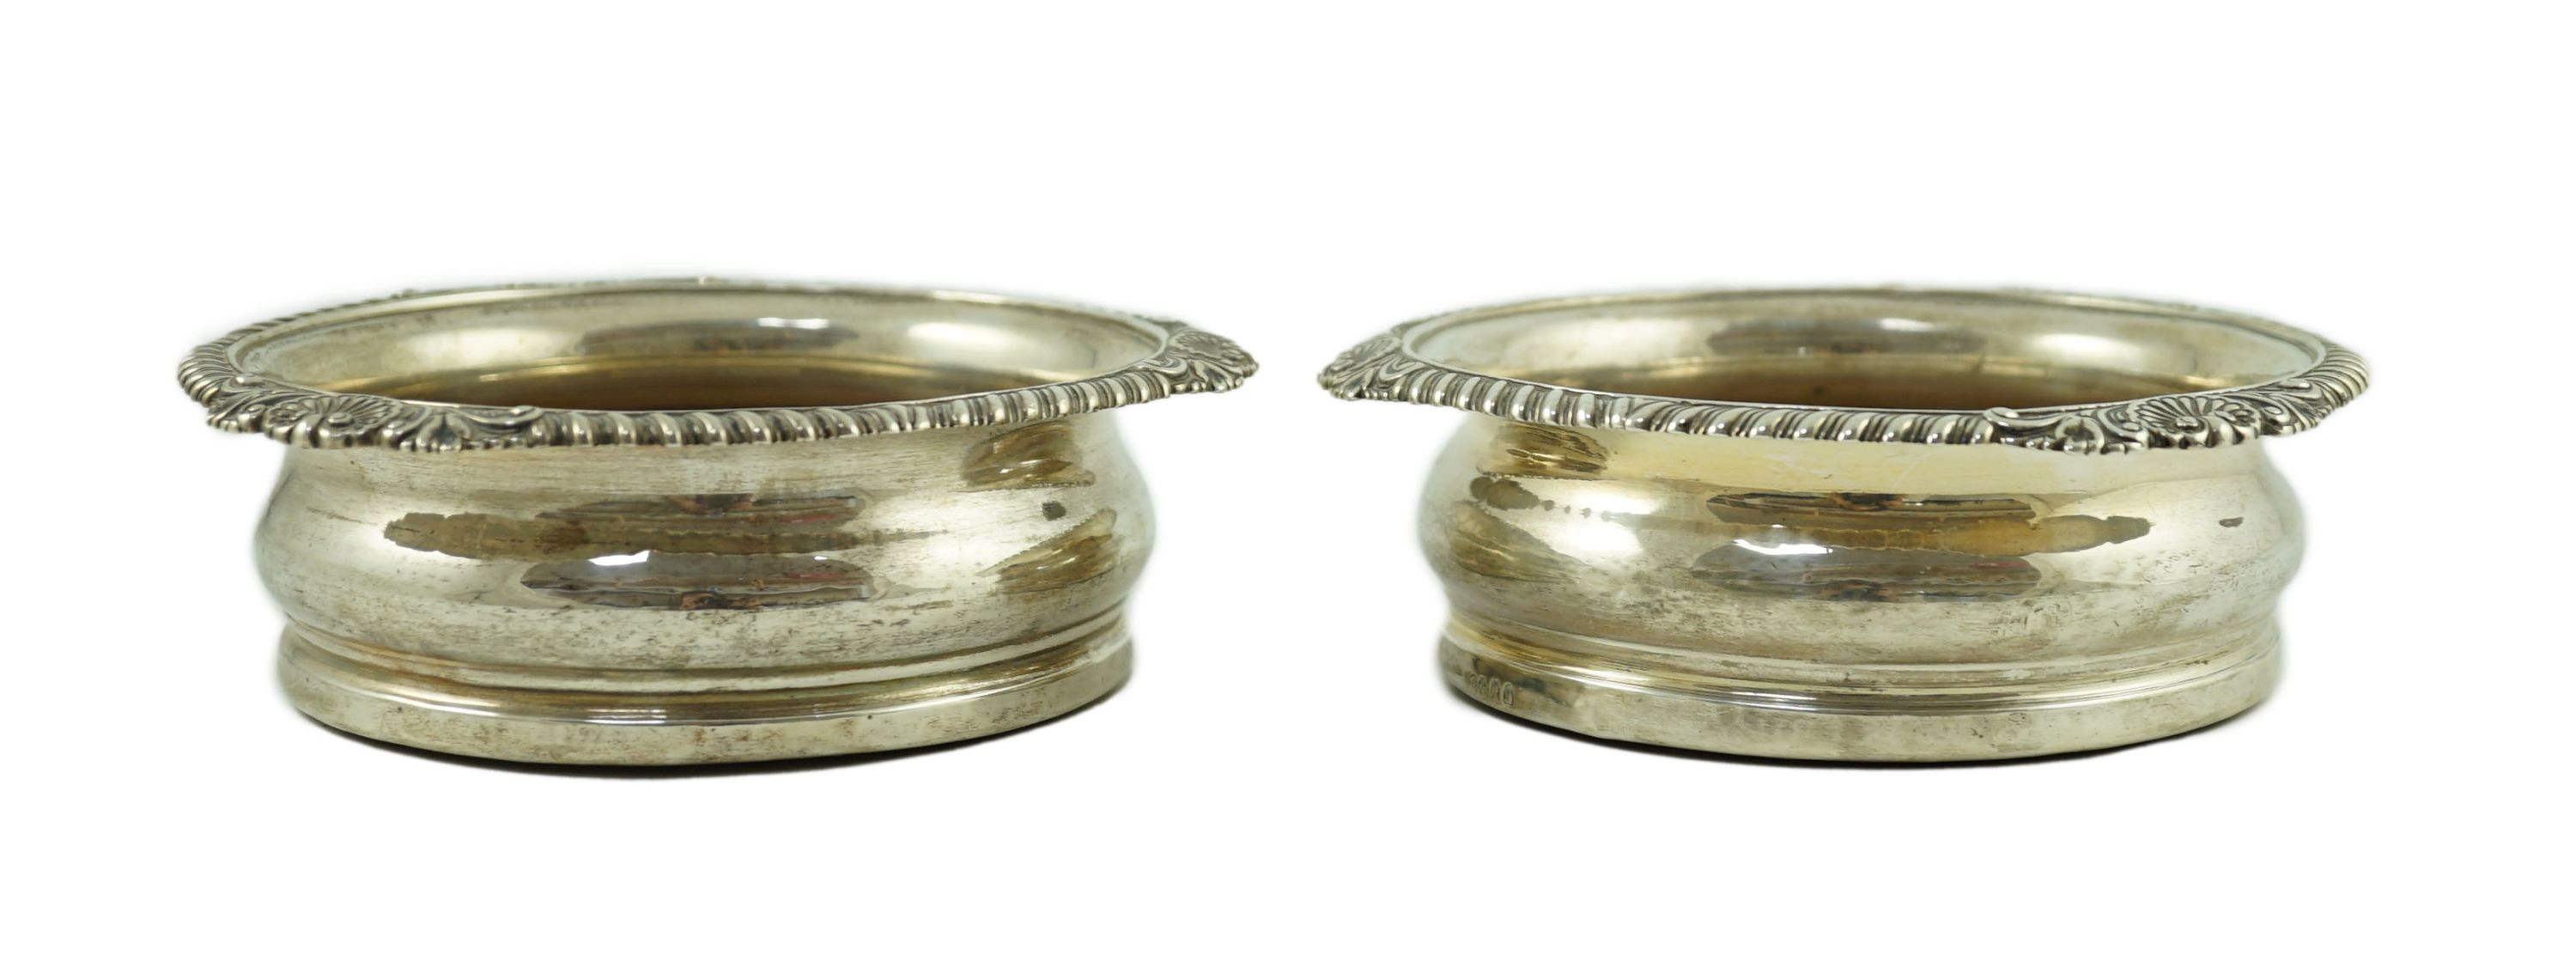 A pair of George IV silver wine coasters by Benjamin Smith III